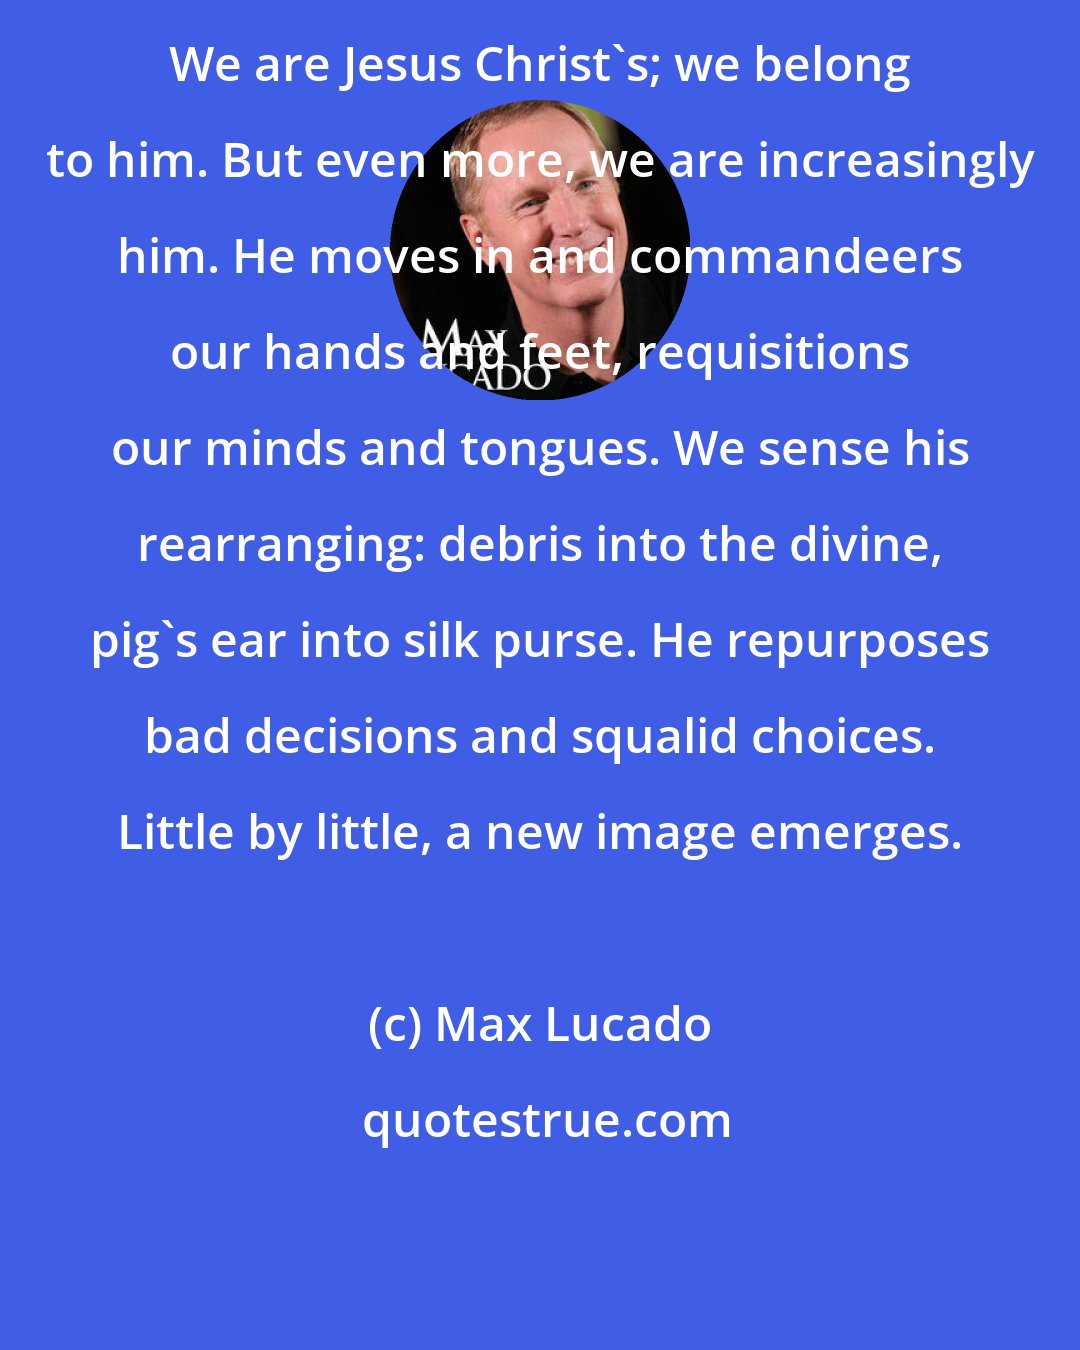 Max Lucado: We are Jesus Christ's; we belong to him. But even more, we are increasingly him. He moves in and commandeers our hands and feet, requisitions our minds and tongues. We sense his rearranging: debris into the divine, pig's ear into silk purse. He repurposes bad decisions and squalid choices. Little by little, a new image emerges.